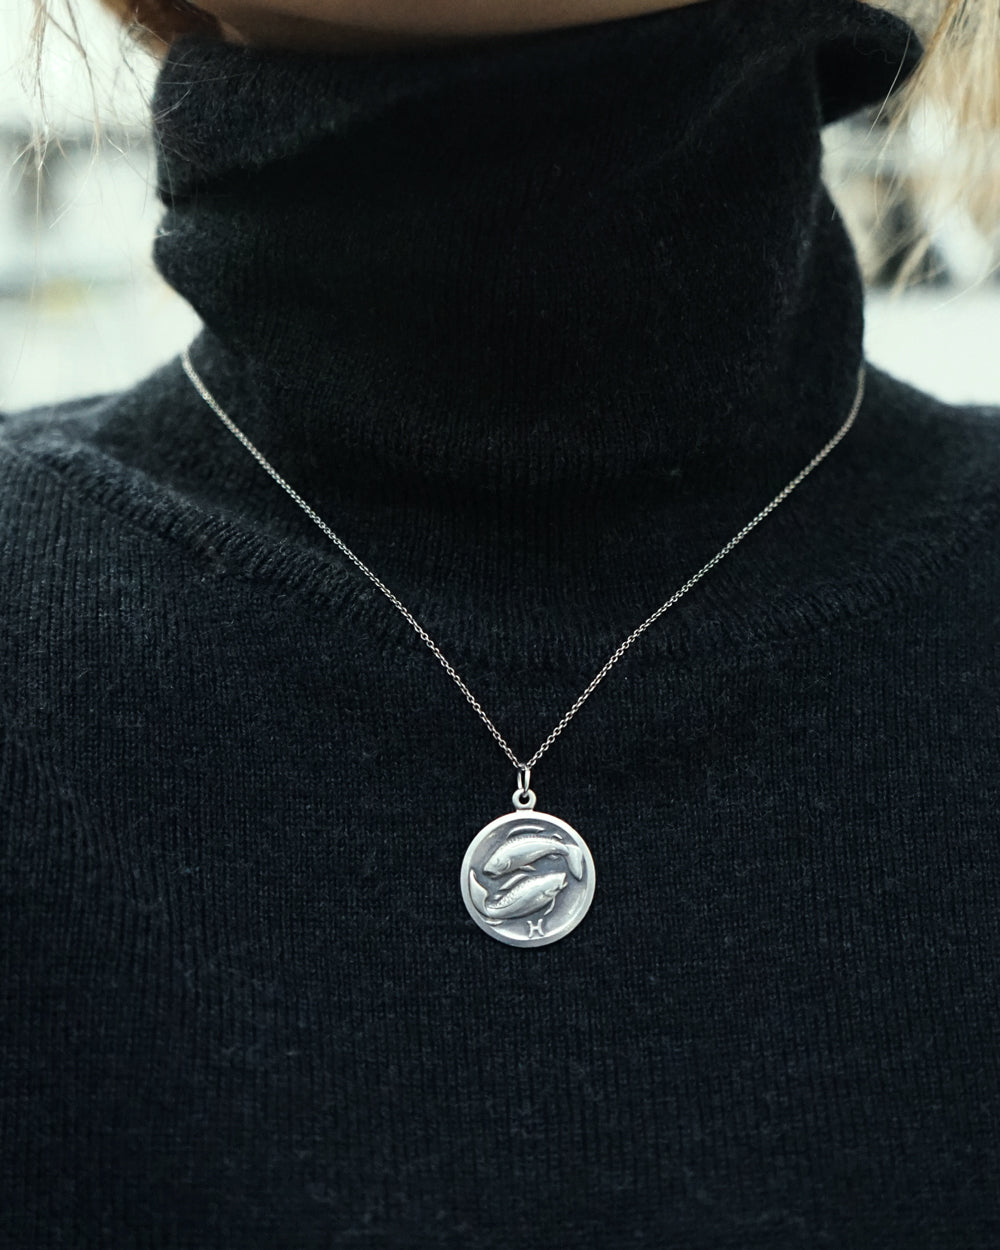 Silver Chain Necklace w/ Pisces Coin Charm